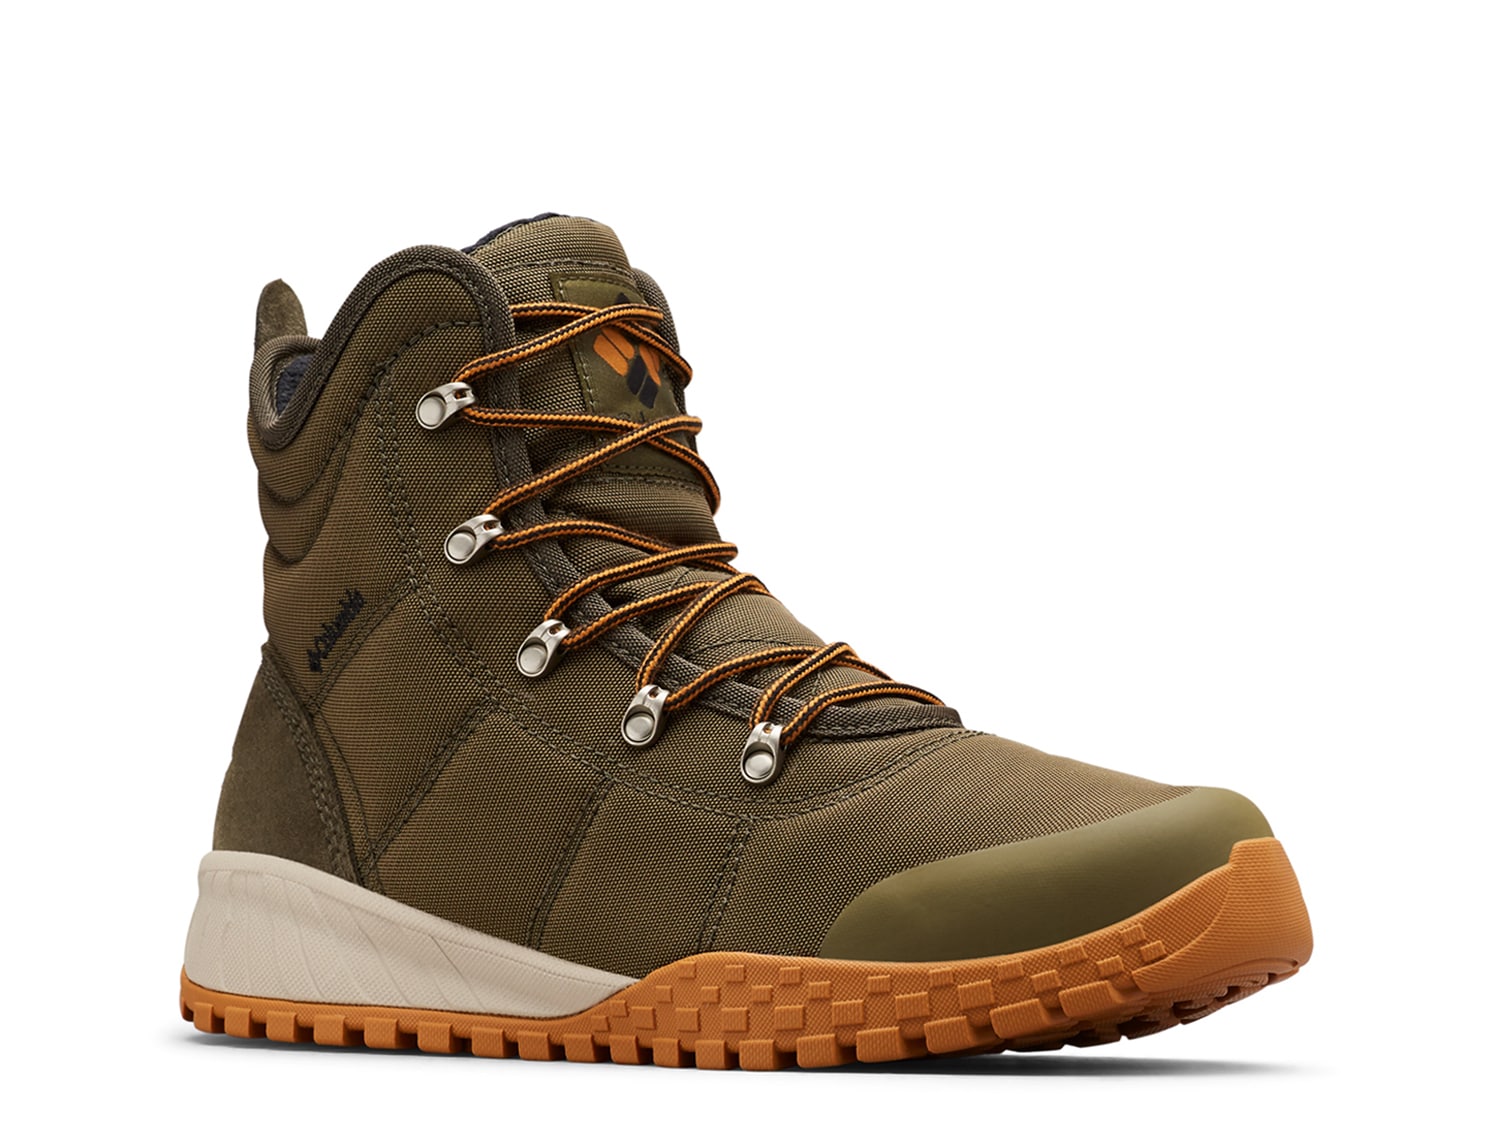 Secondly energy school Columbia Fairbanks Snow Boot - Men's - Free Shipping | DSW